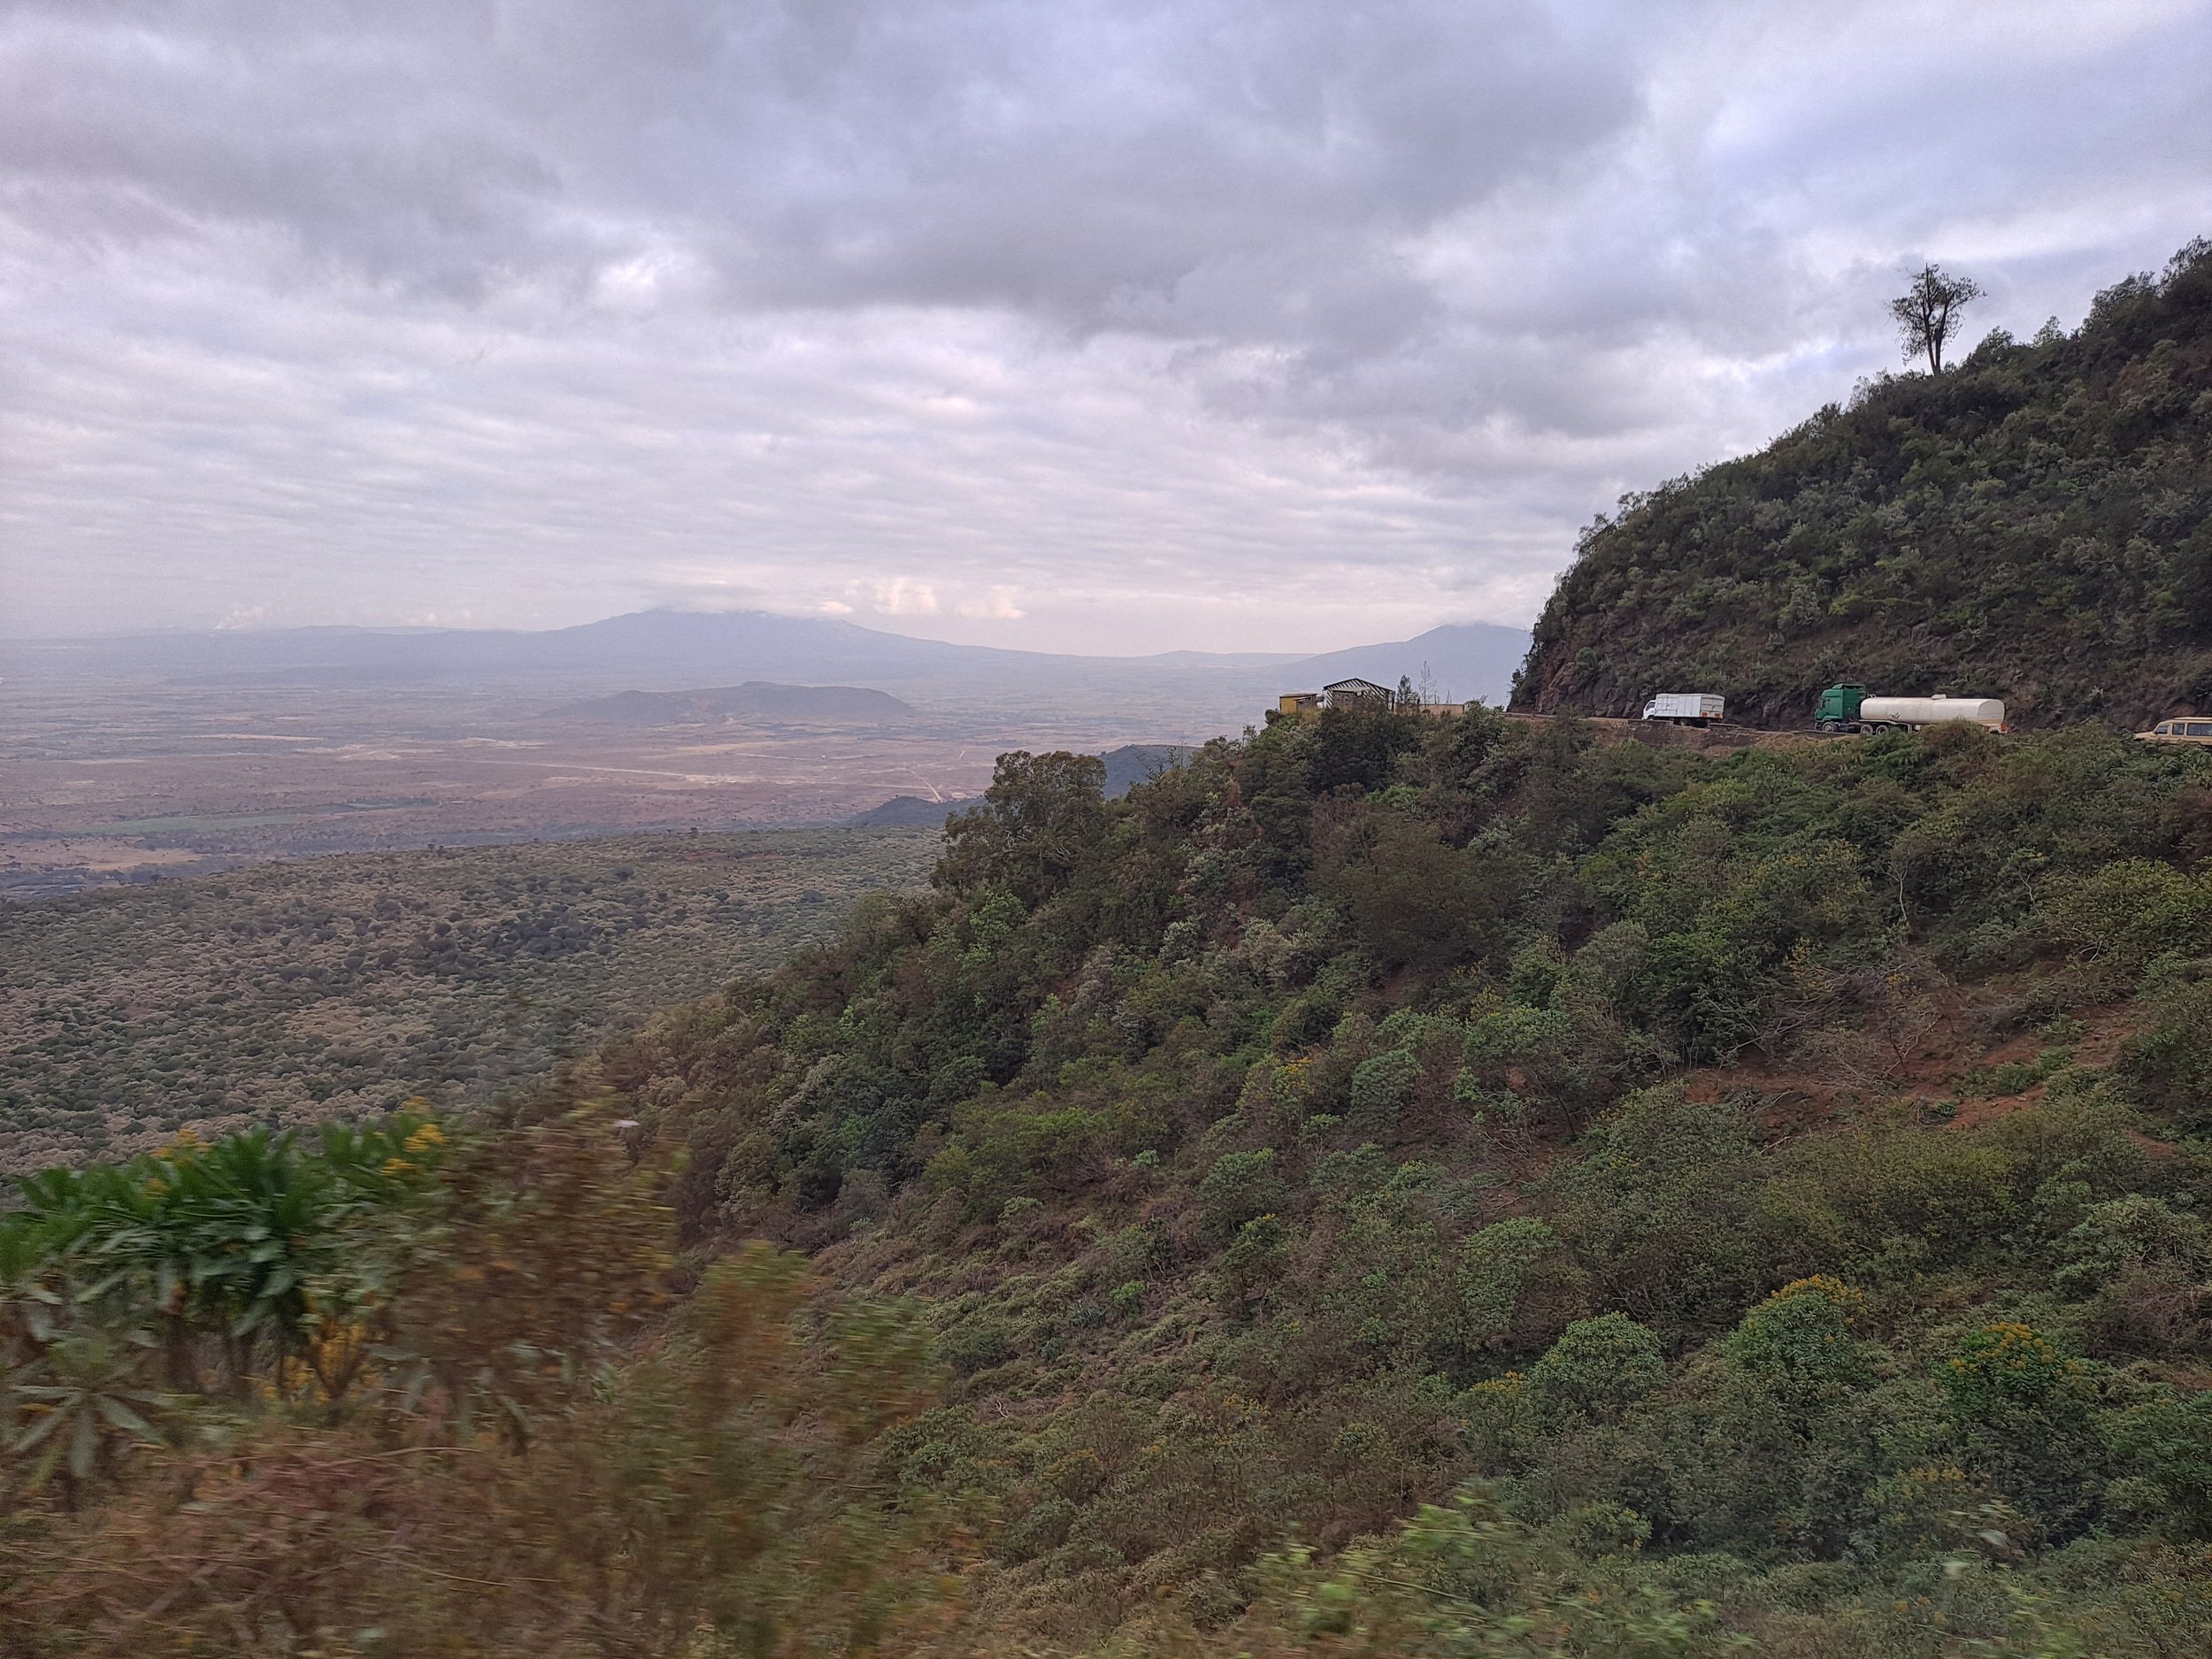 Drive into the Great Rift Valley